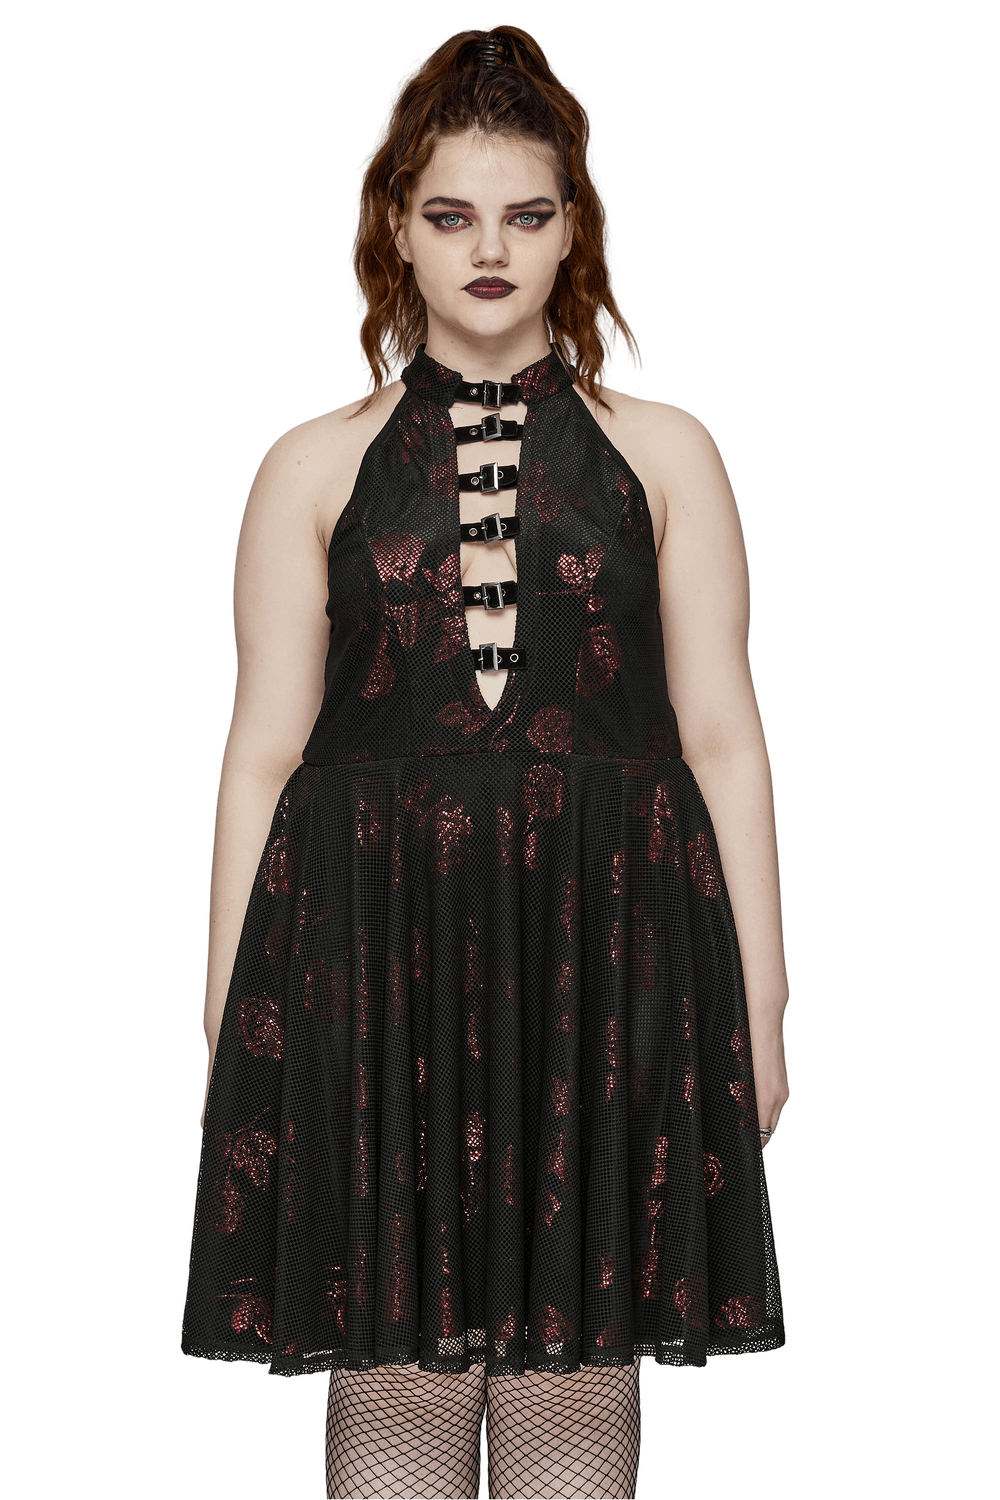 Gothic Roses A-Line Design Dress with V-Neck and Buckles